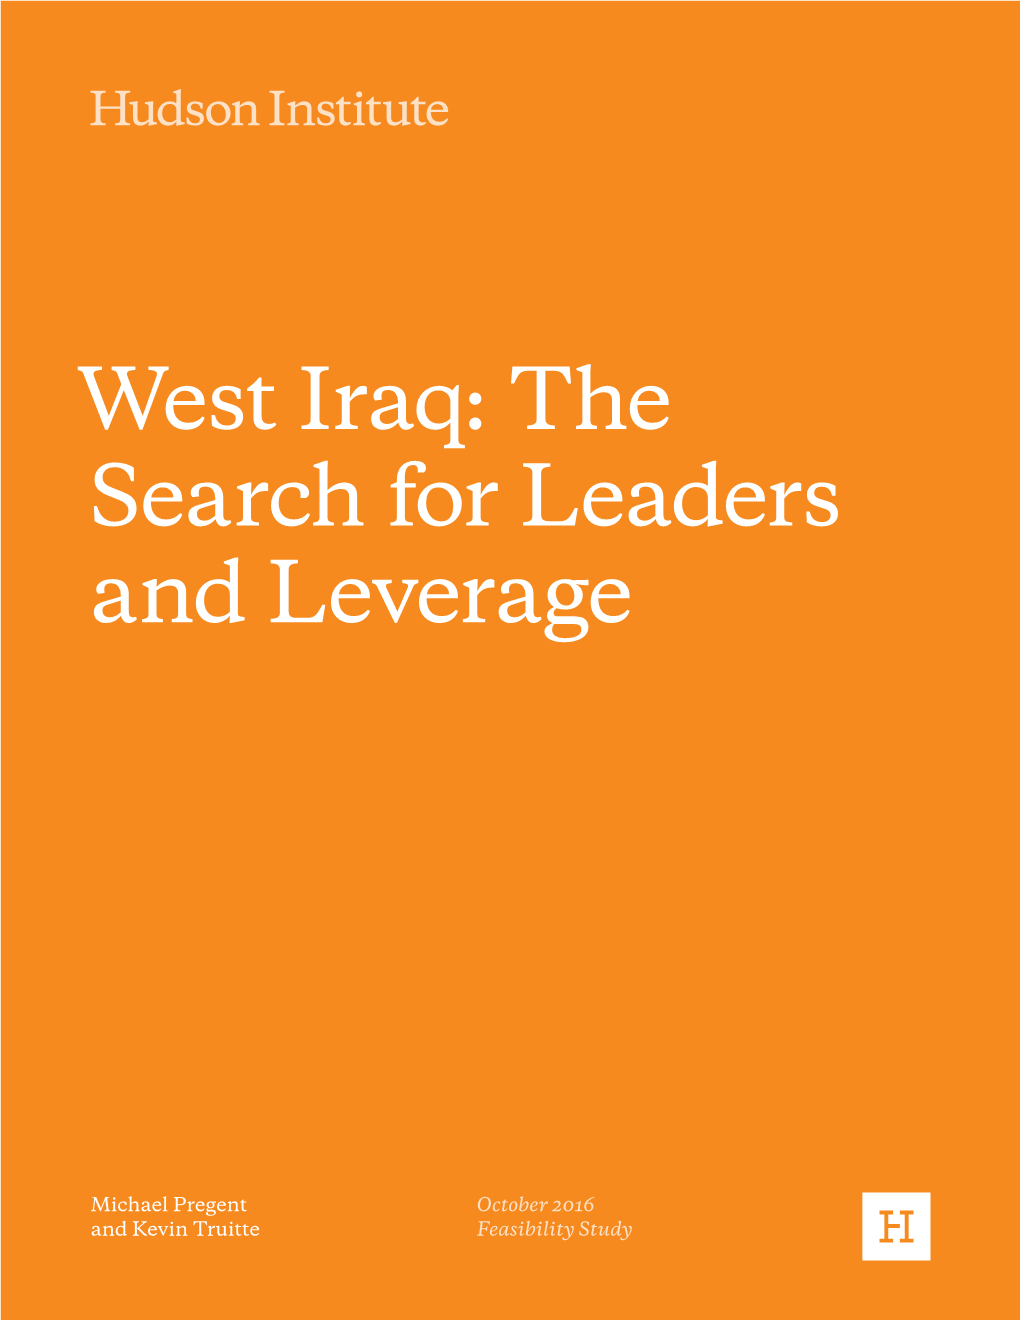 West Iraq: the Search for Leaders and Leverage